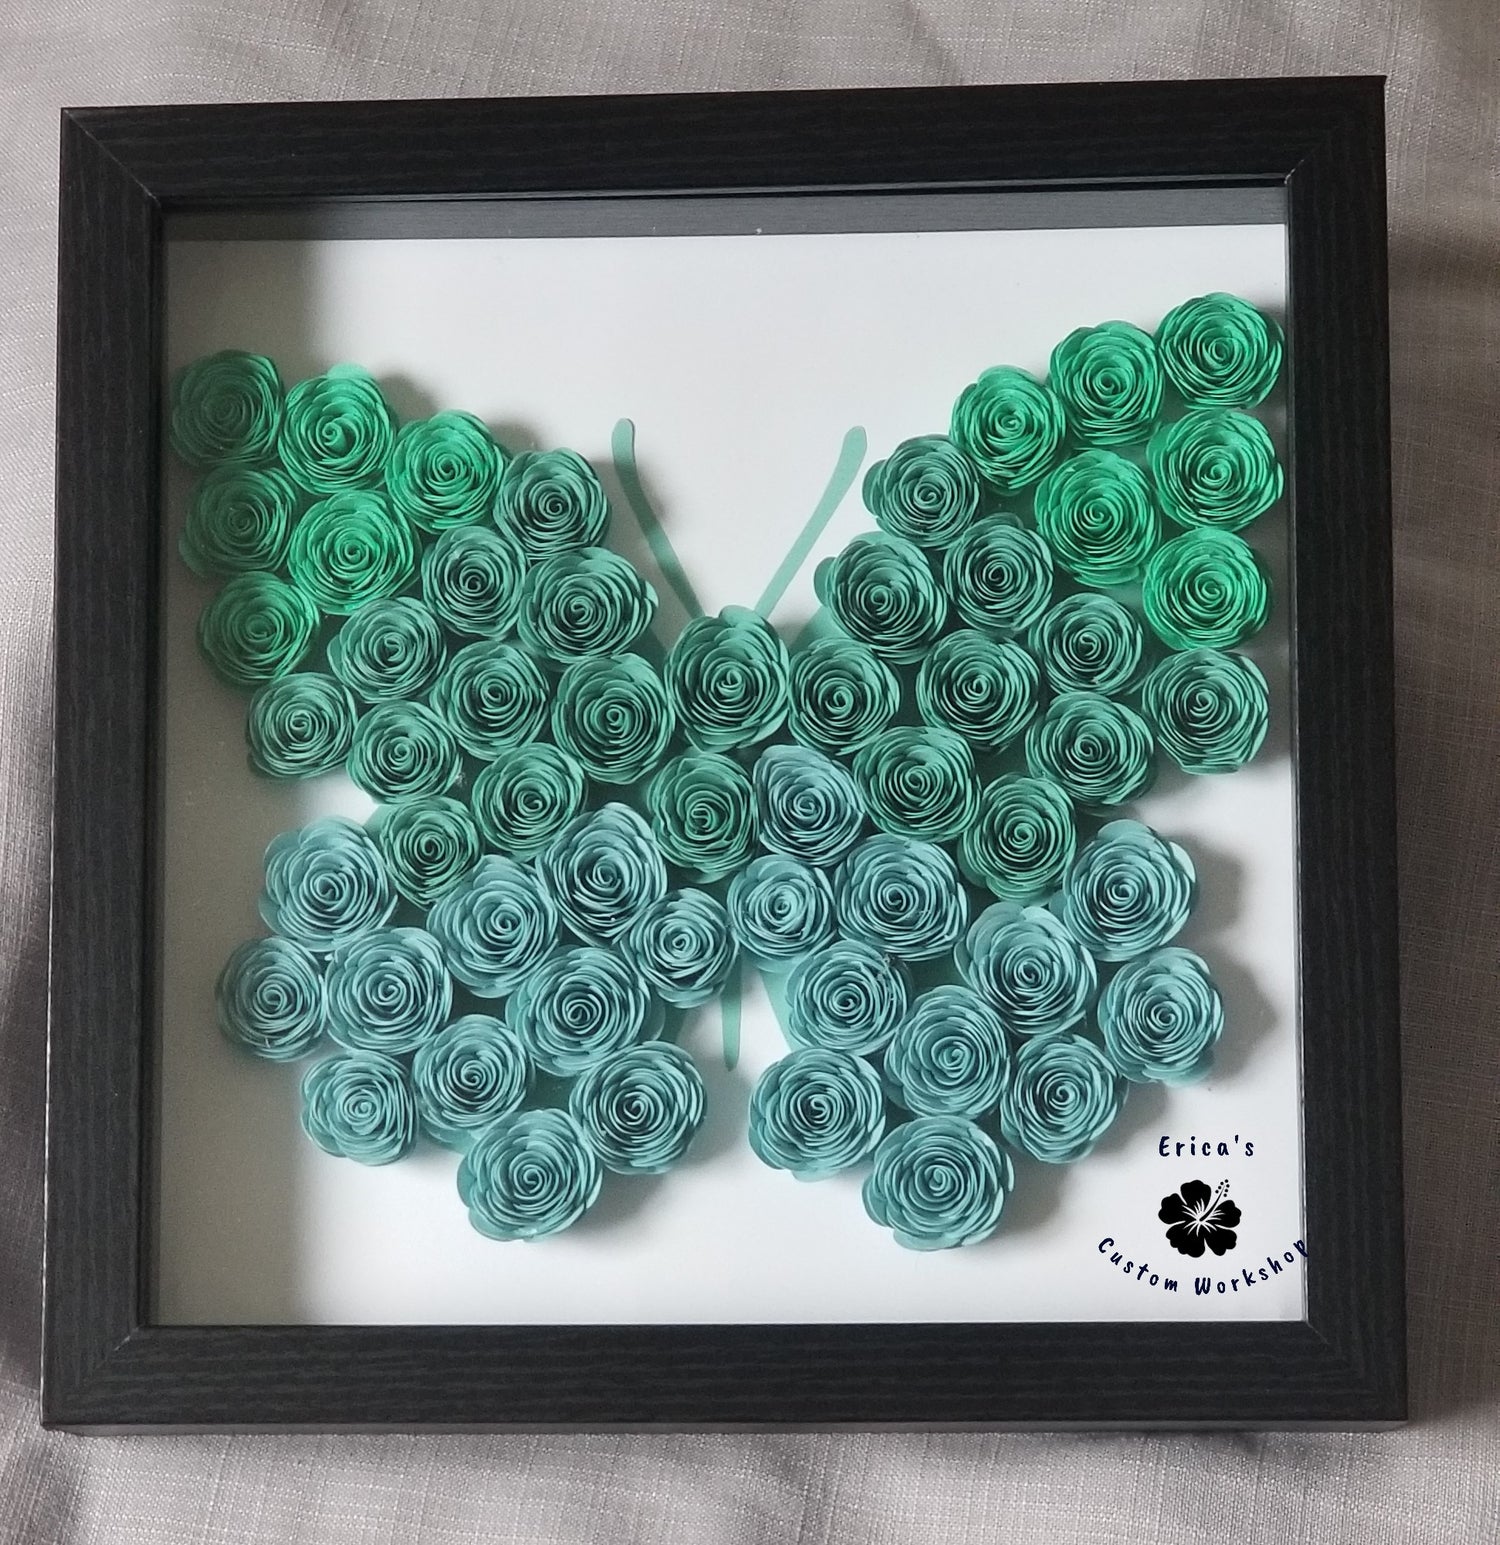 Rolled paper flowers in the shape of a butterfly